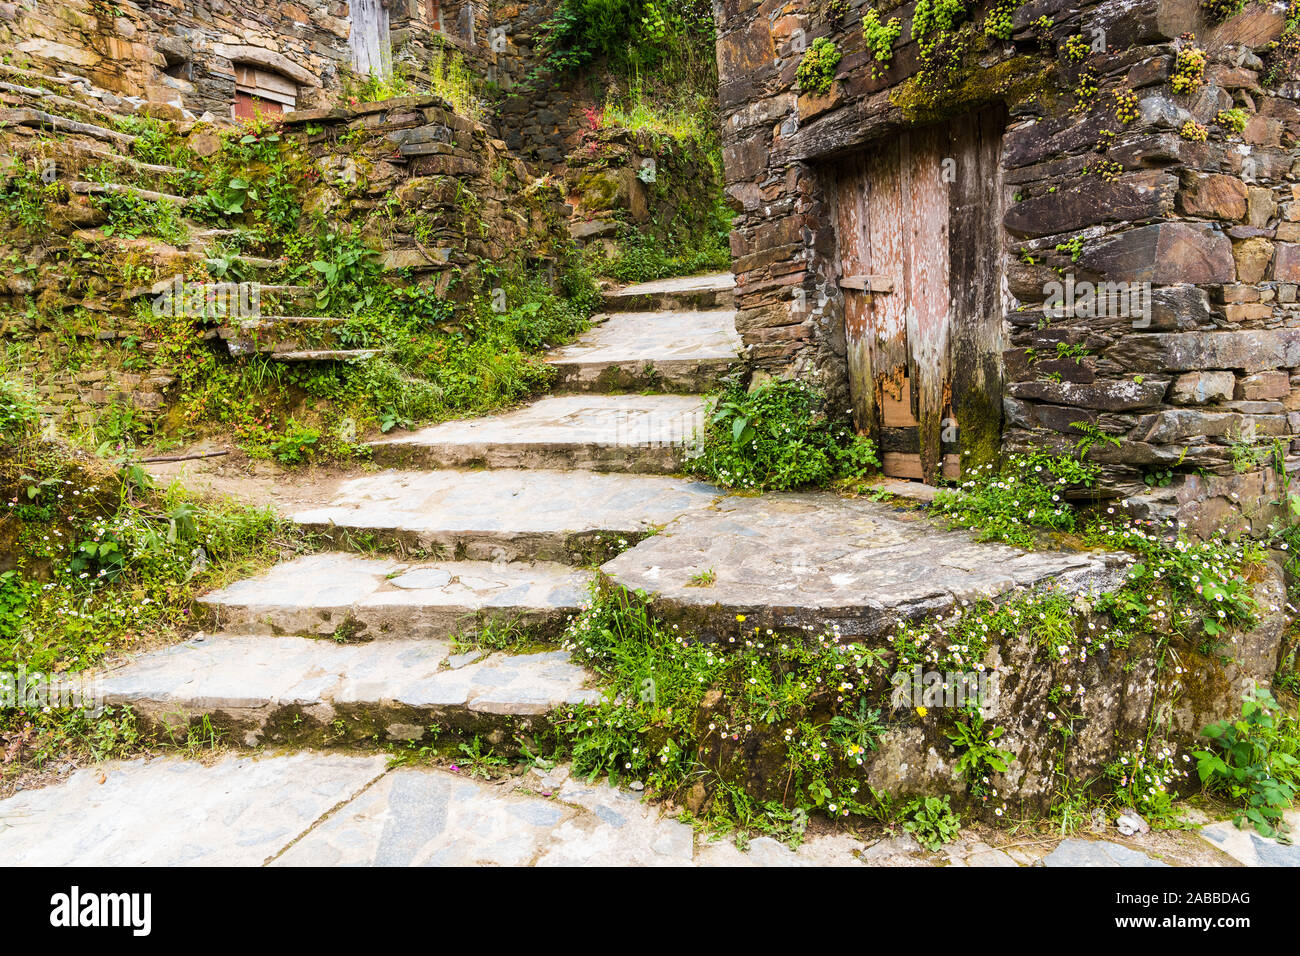 Stone stairway between rustic stone buildings overgrown with lush greenery and wildflowers in Talasnal, Portugal Stock Photo